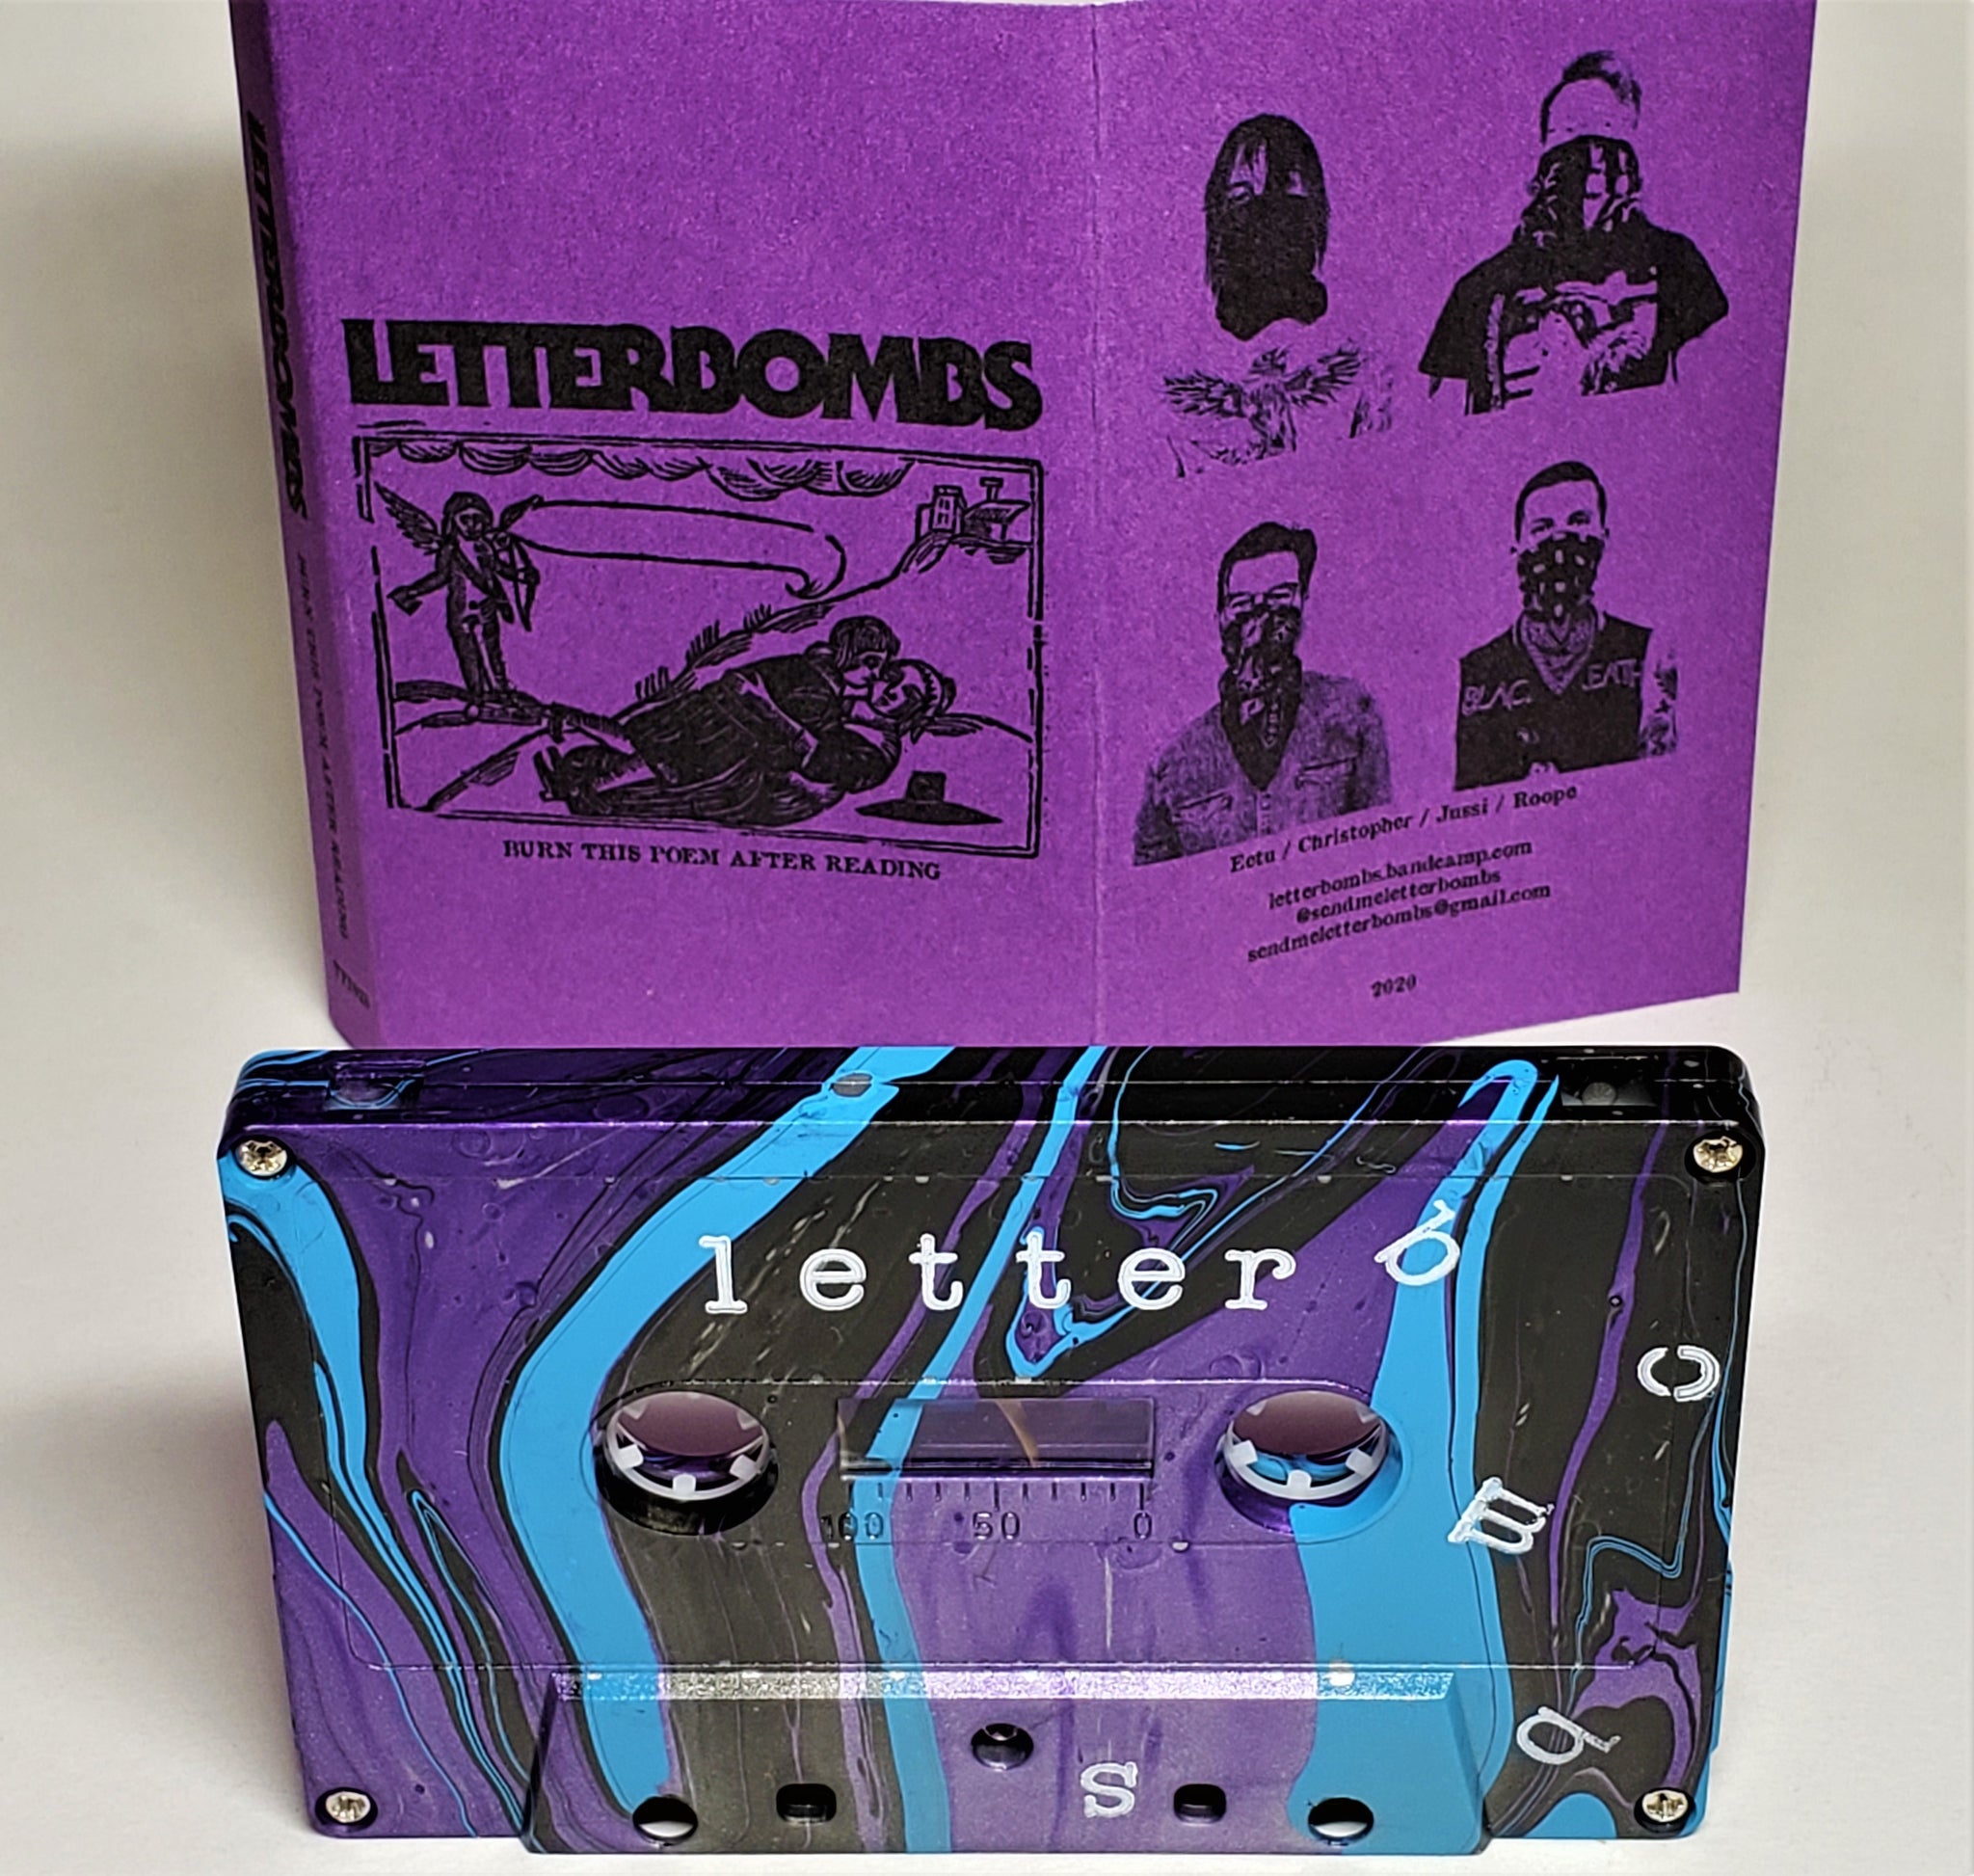 LETTERBOMBS - Burn This Poem After Reading (cassette)